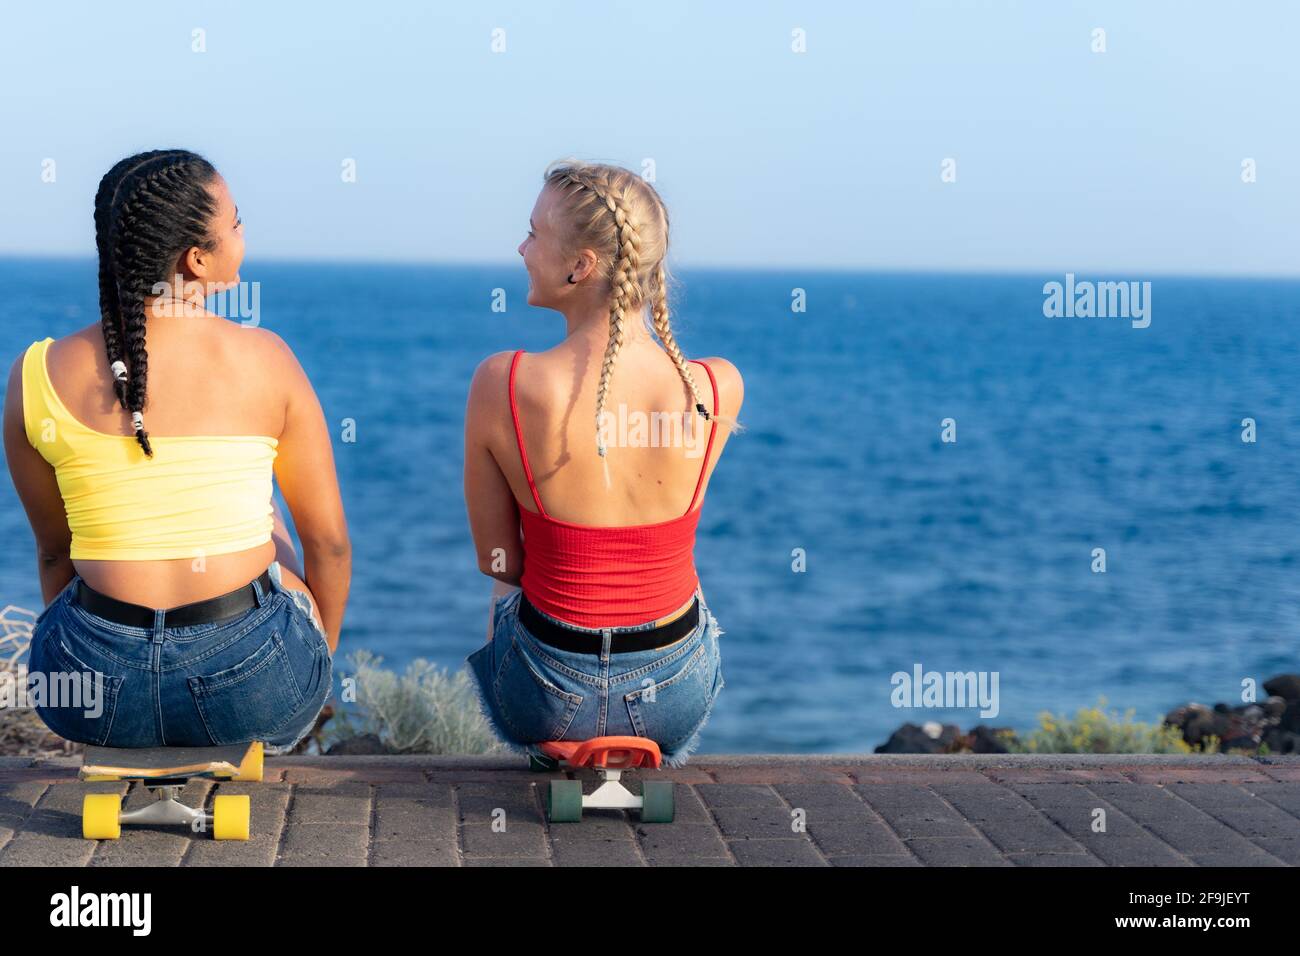 Girls sitting on skateboard and looking at each other. Outdoors, urban lifestyle.  Relax and friendship concept. Stock Photo